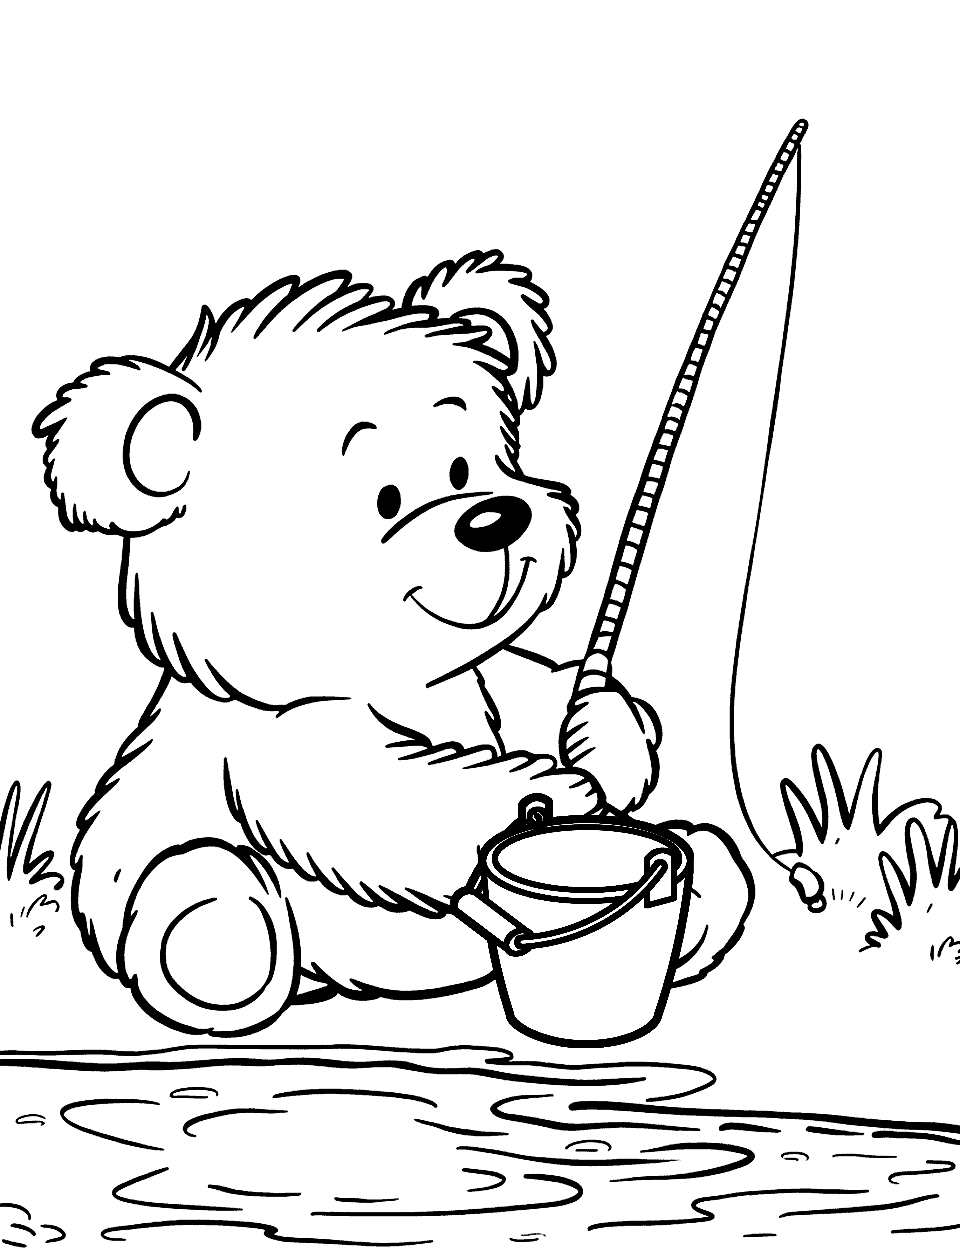 Fishing Teddy Bear Coloring Page - A teddy bear sitting by a pond with a fishing rod.